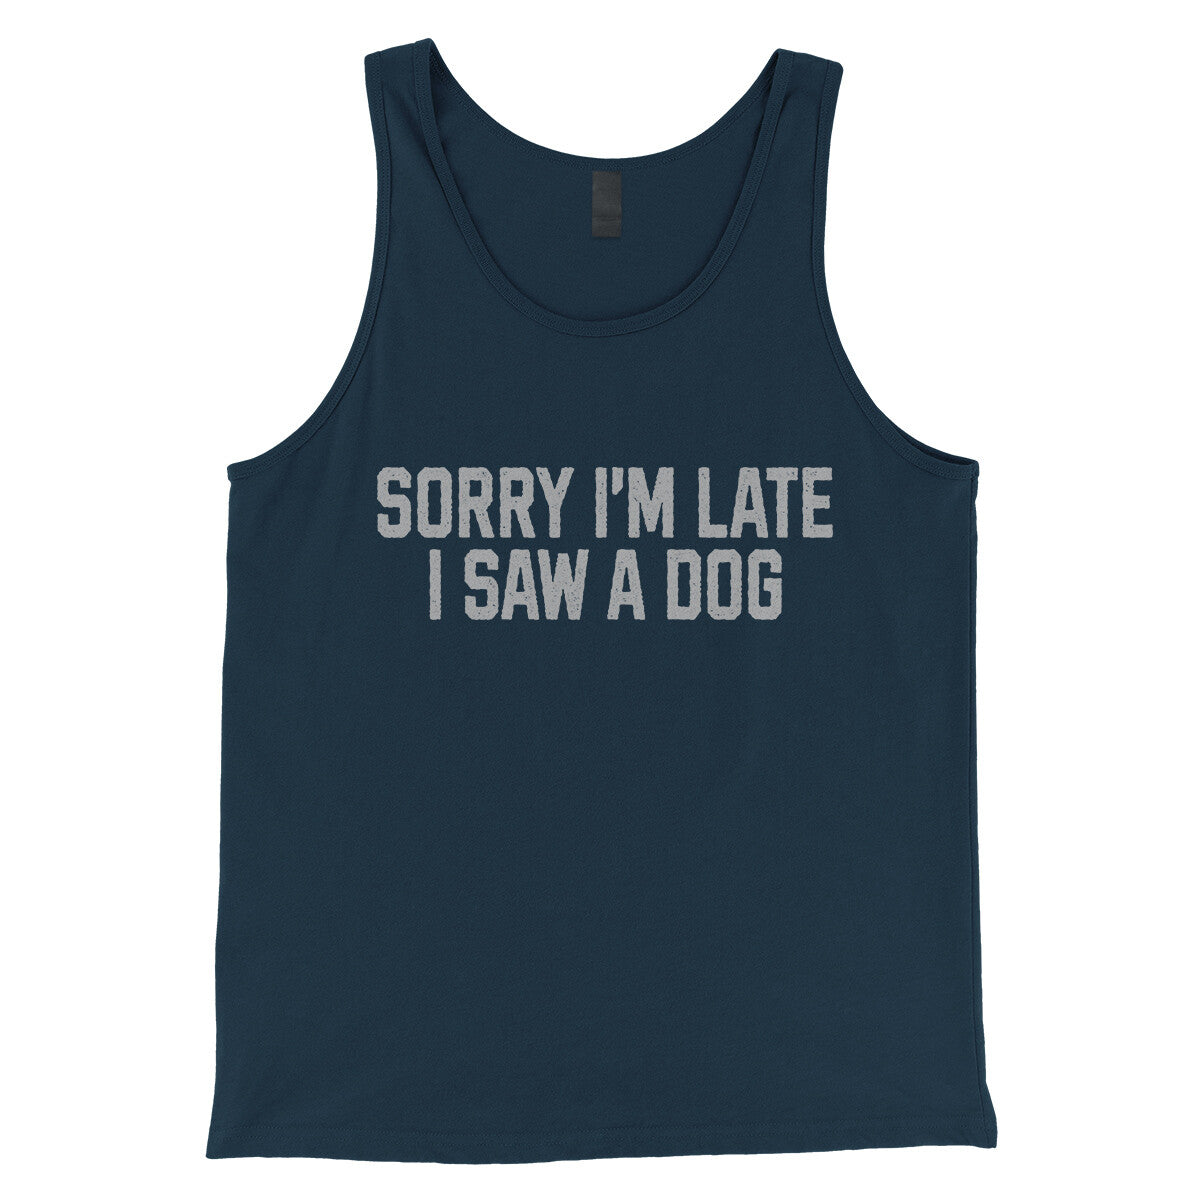 Sorry I'm Late I Saw a Dog in Navy Color